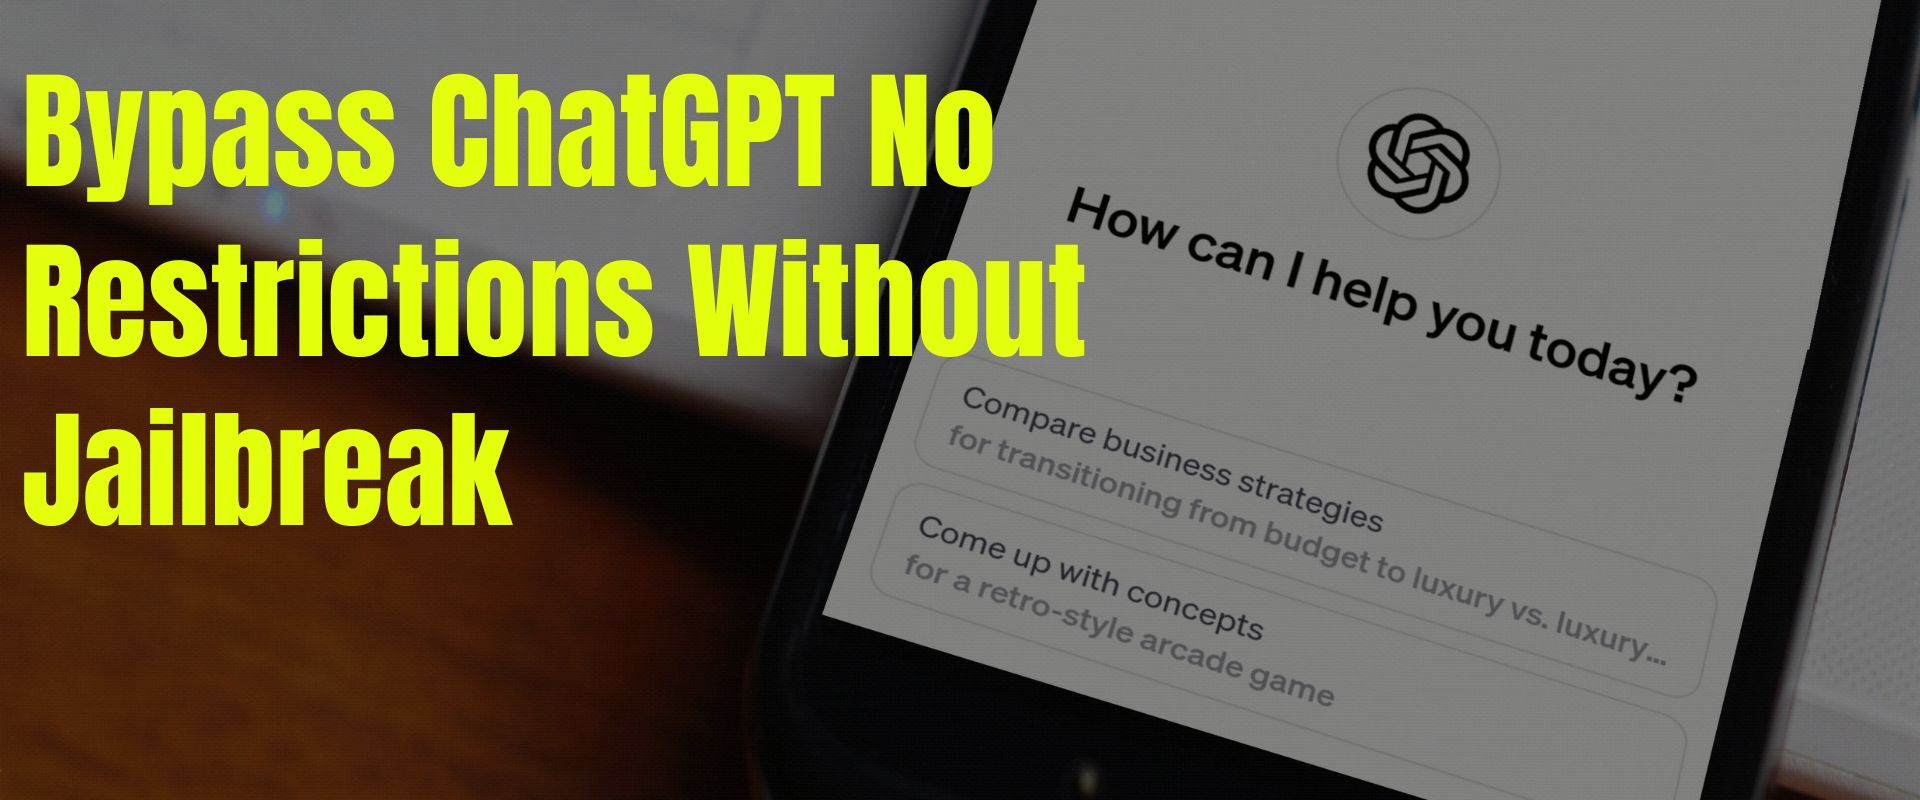 bypass chatgpt no restrictions without jailbreak